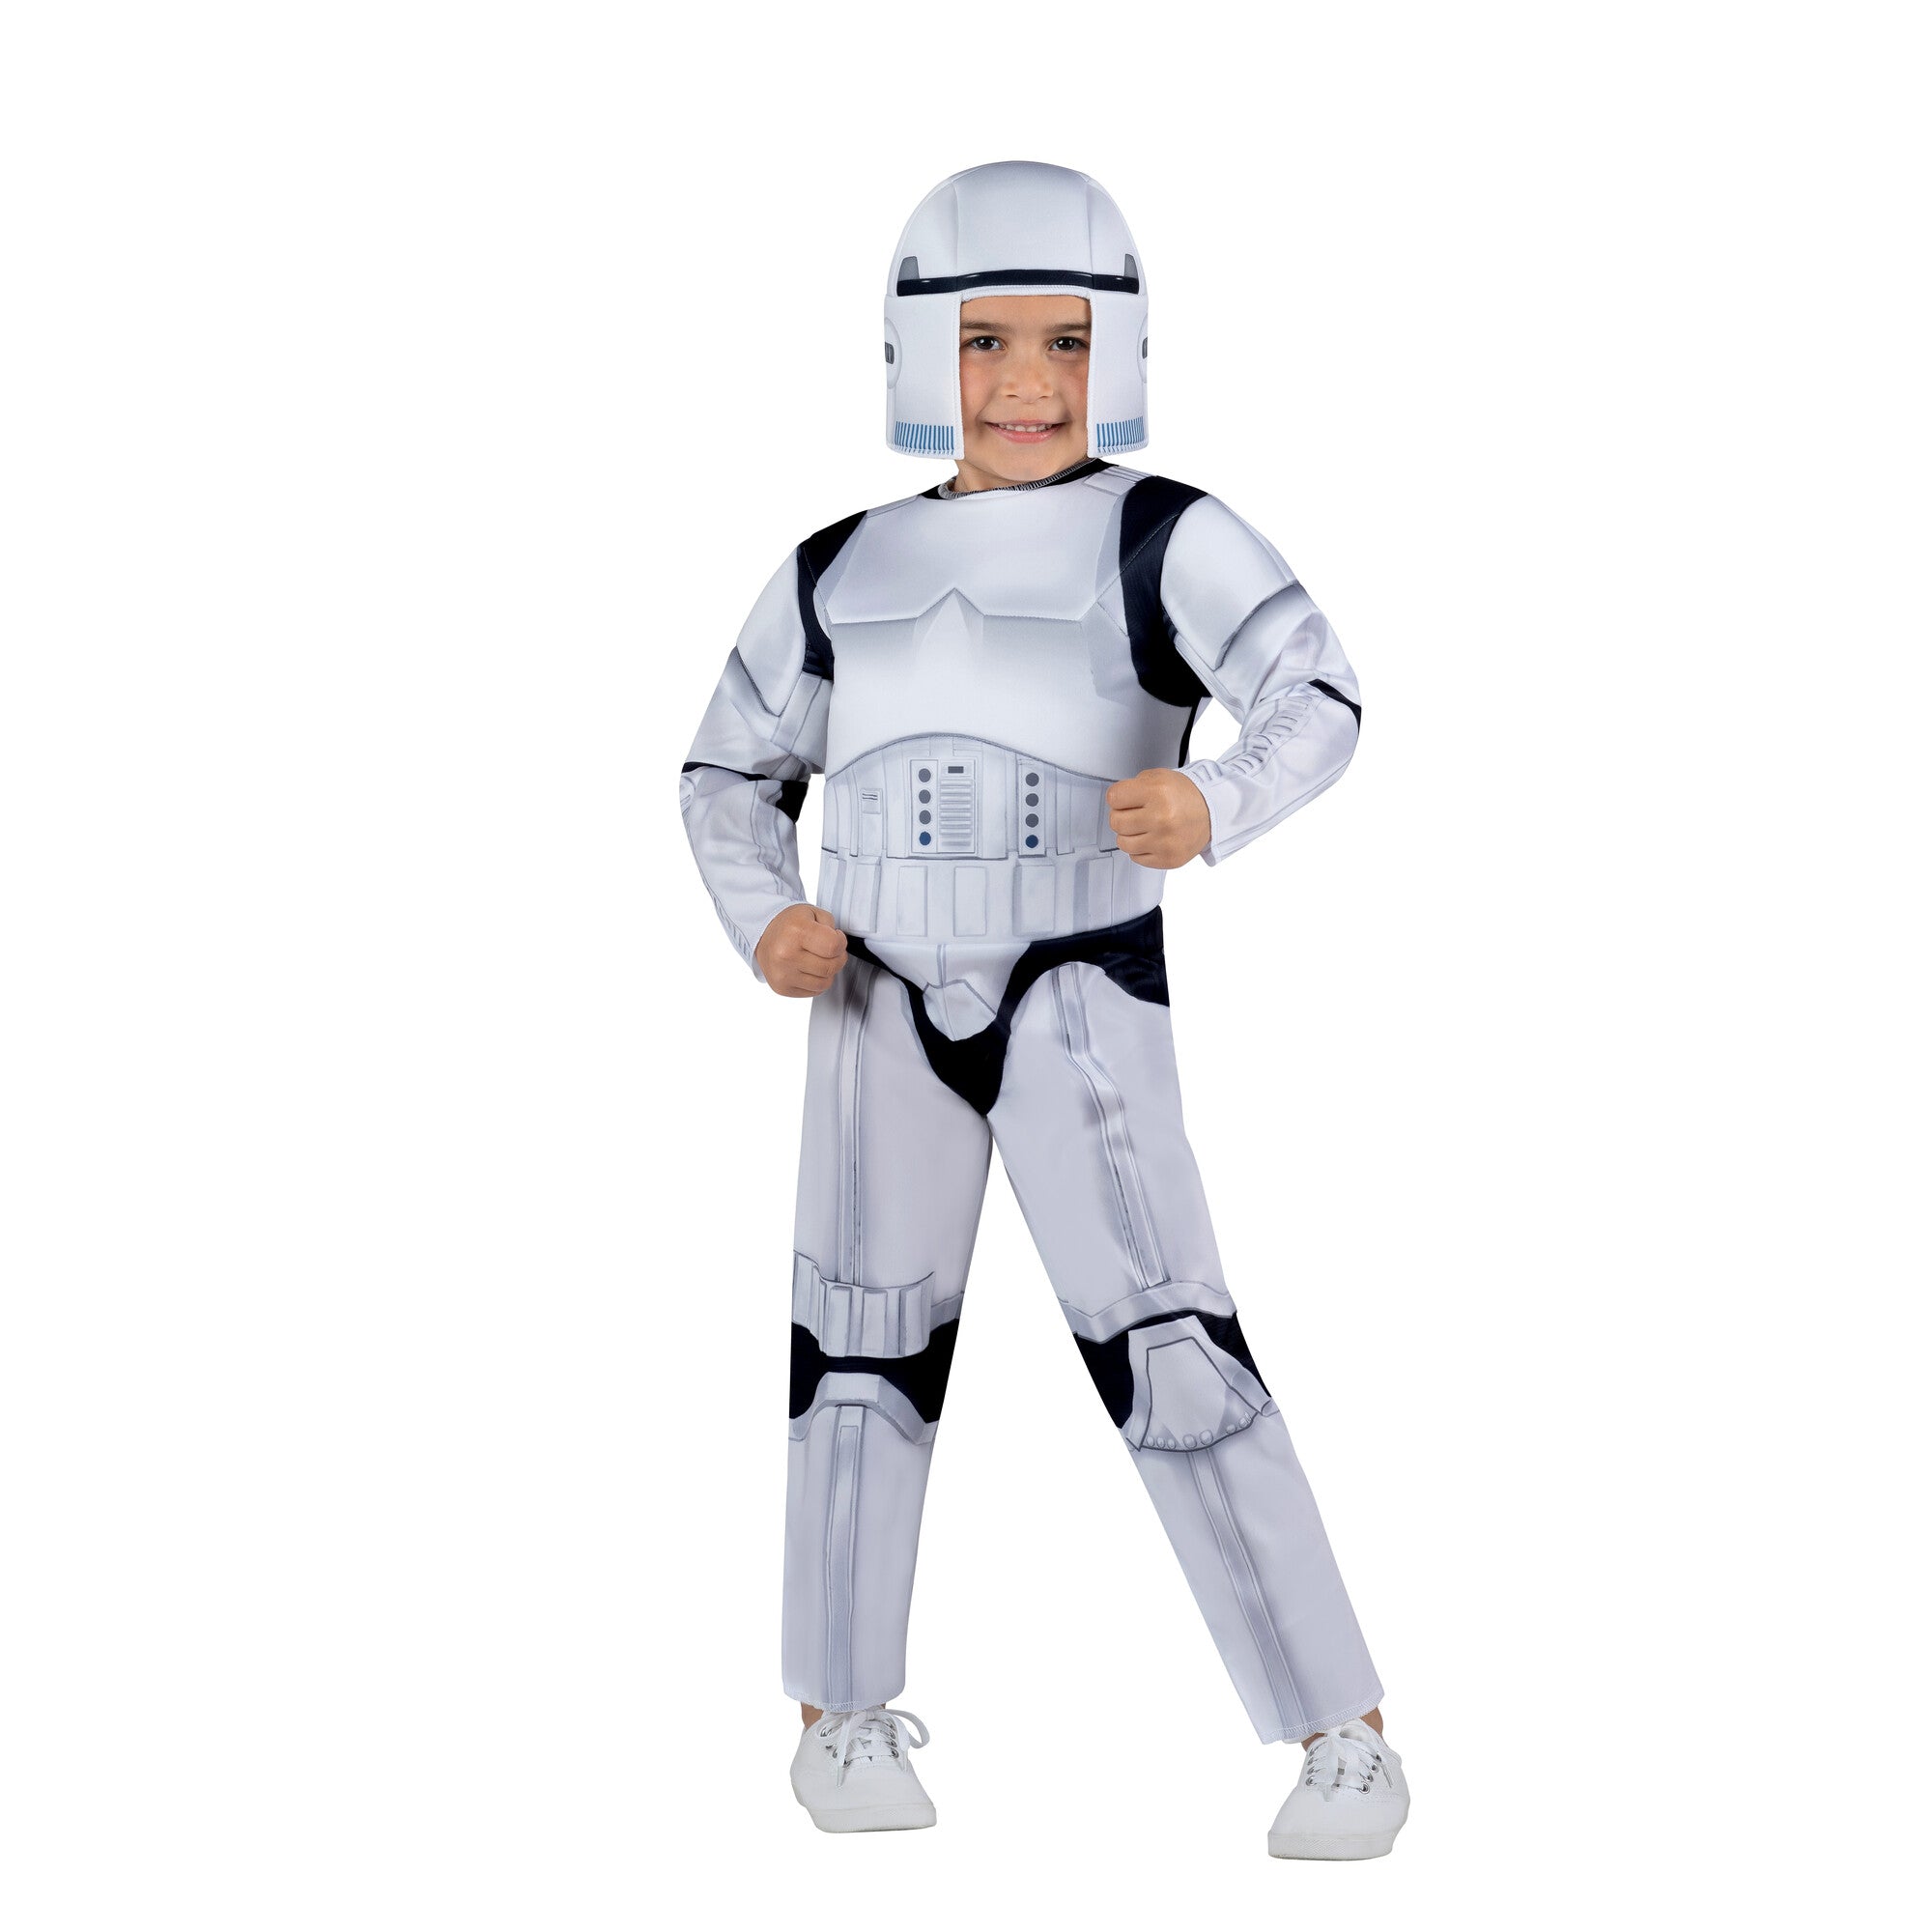 Star Wars Stormtrooper Costume for Toddles, Padded Jumpsuit